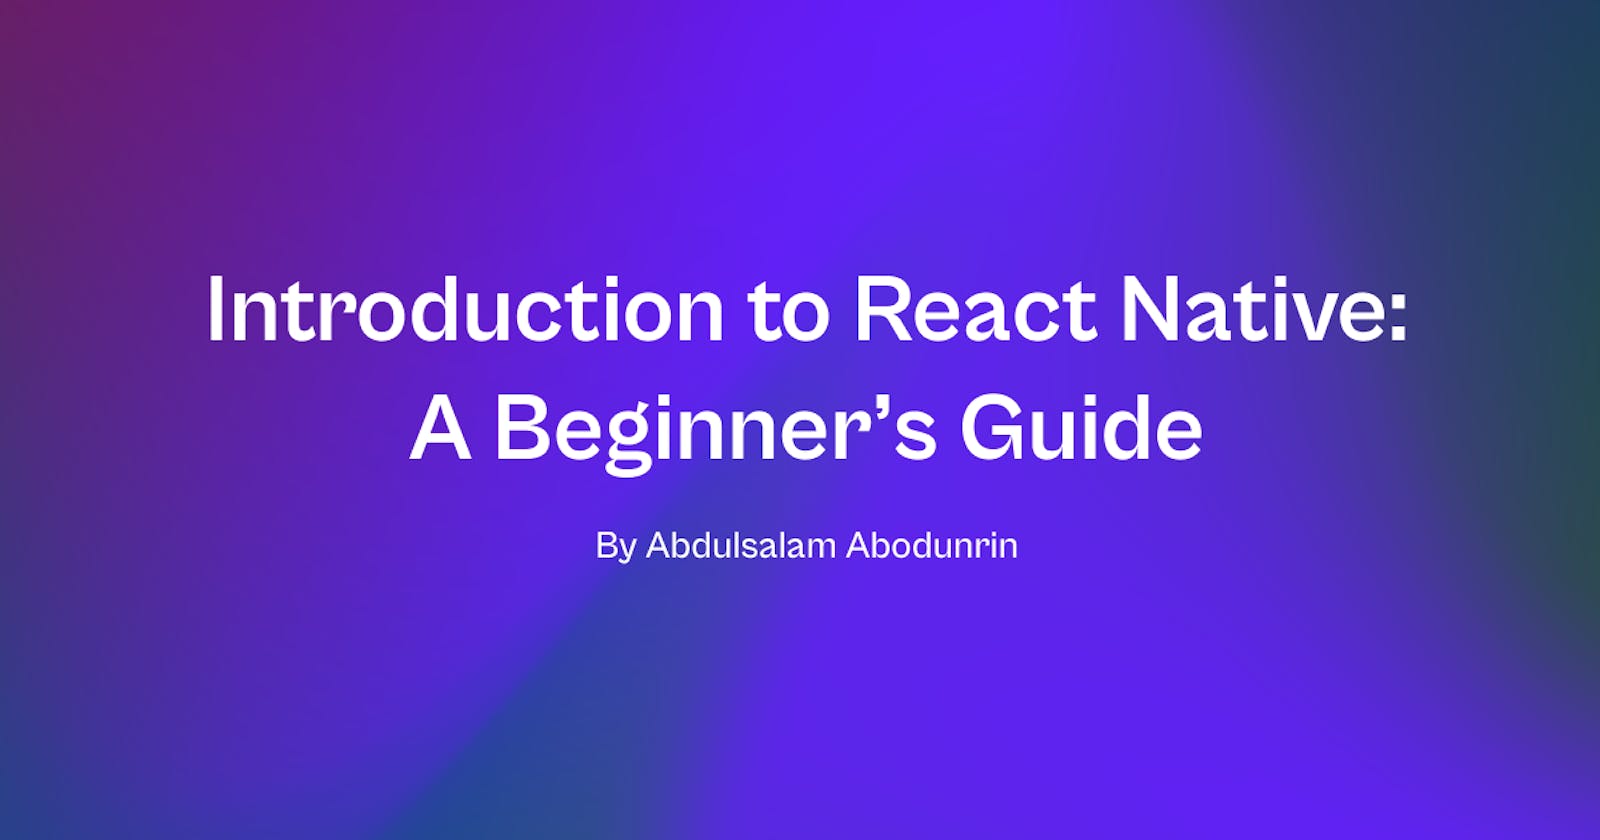 Introduction to React Native: A beginner's guide.